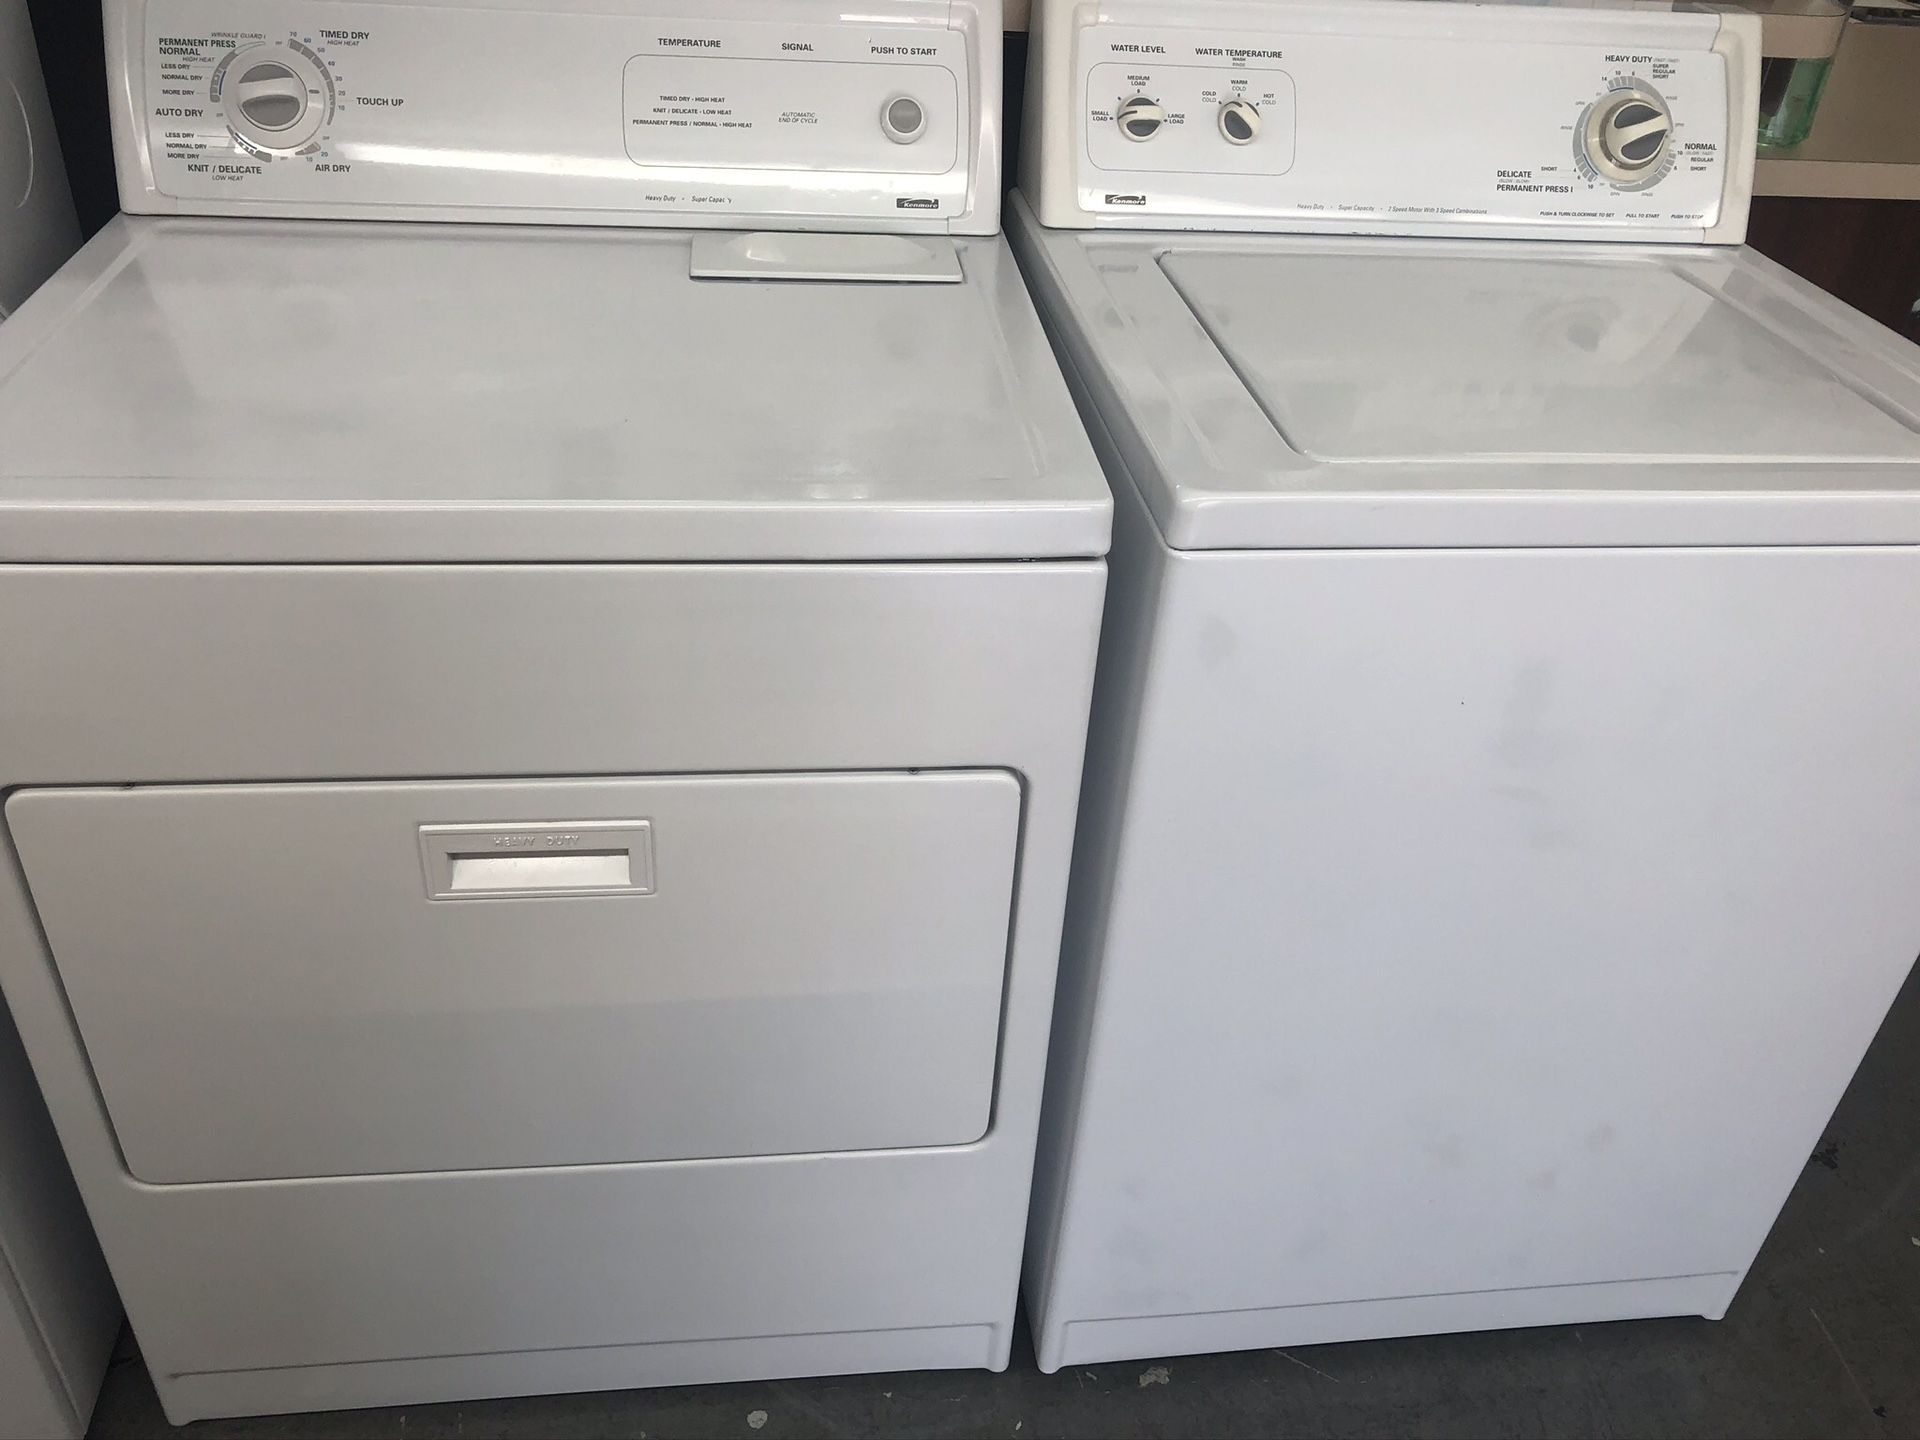 Used kenmore washer and dryer set. 1 year warranty